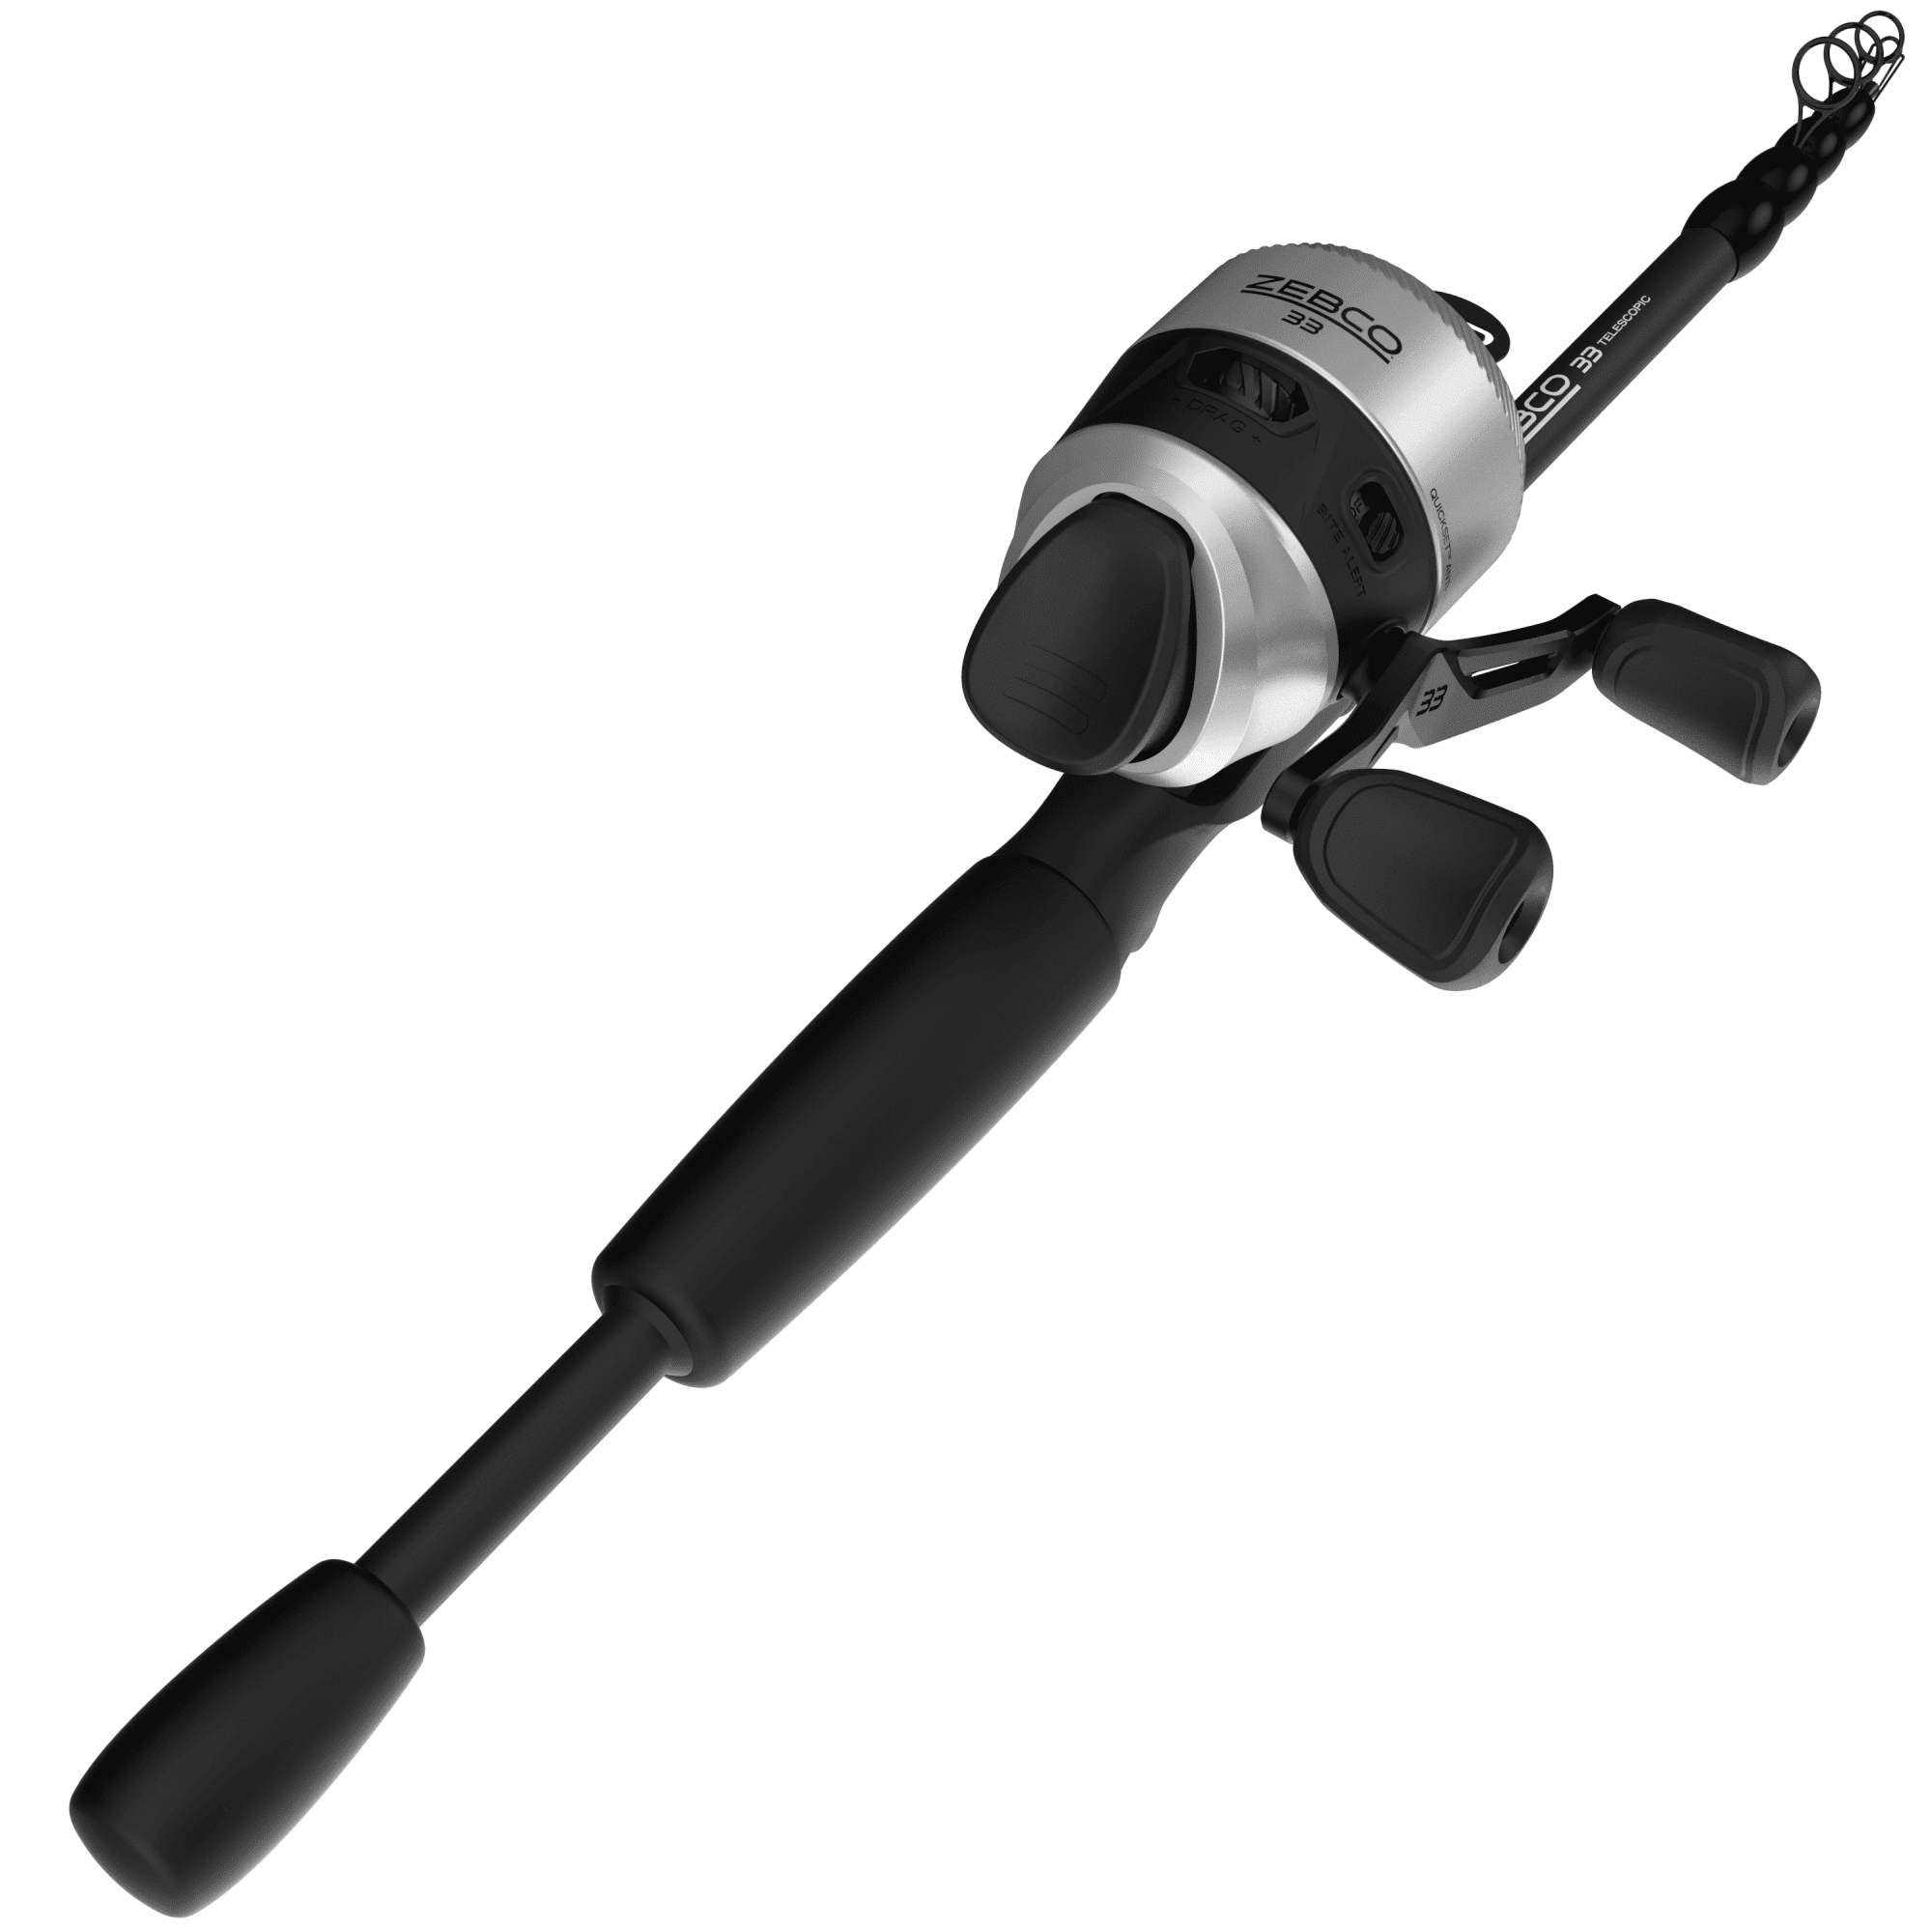 Zebco 33 Spincast Reel and Telescopic Fishing Rod Combo, Extendable  22.5-Inch to 6-Foot E-Glass Fishing Pole, Size 30 Reel, QuickSet  Anti-Reverse